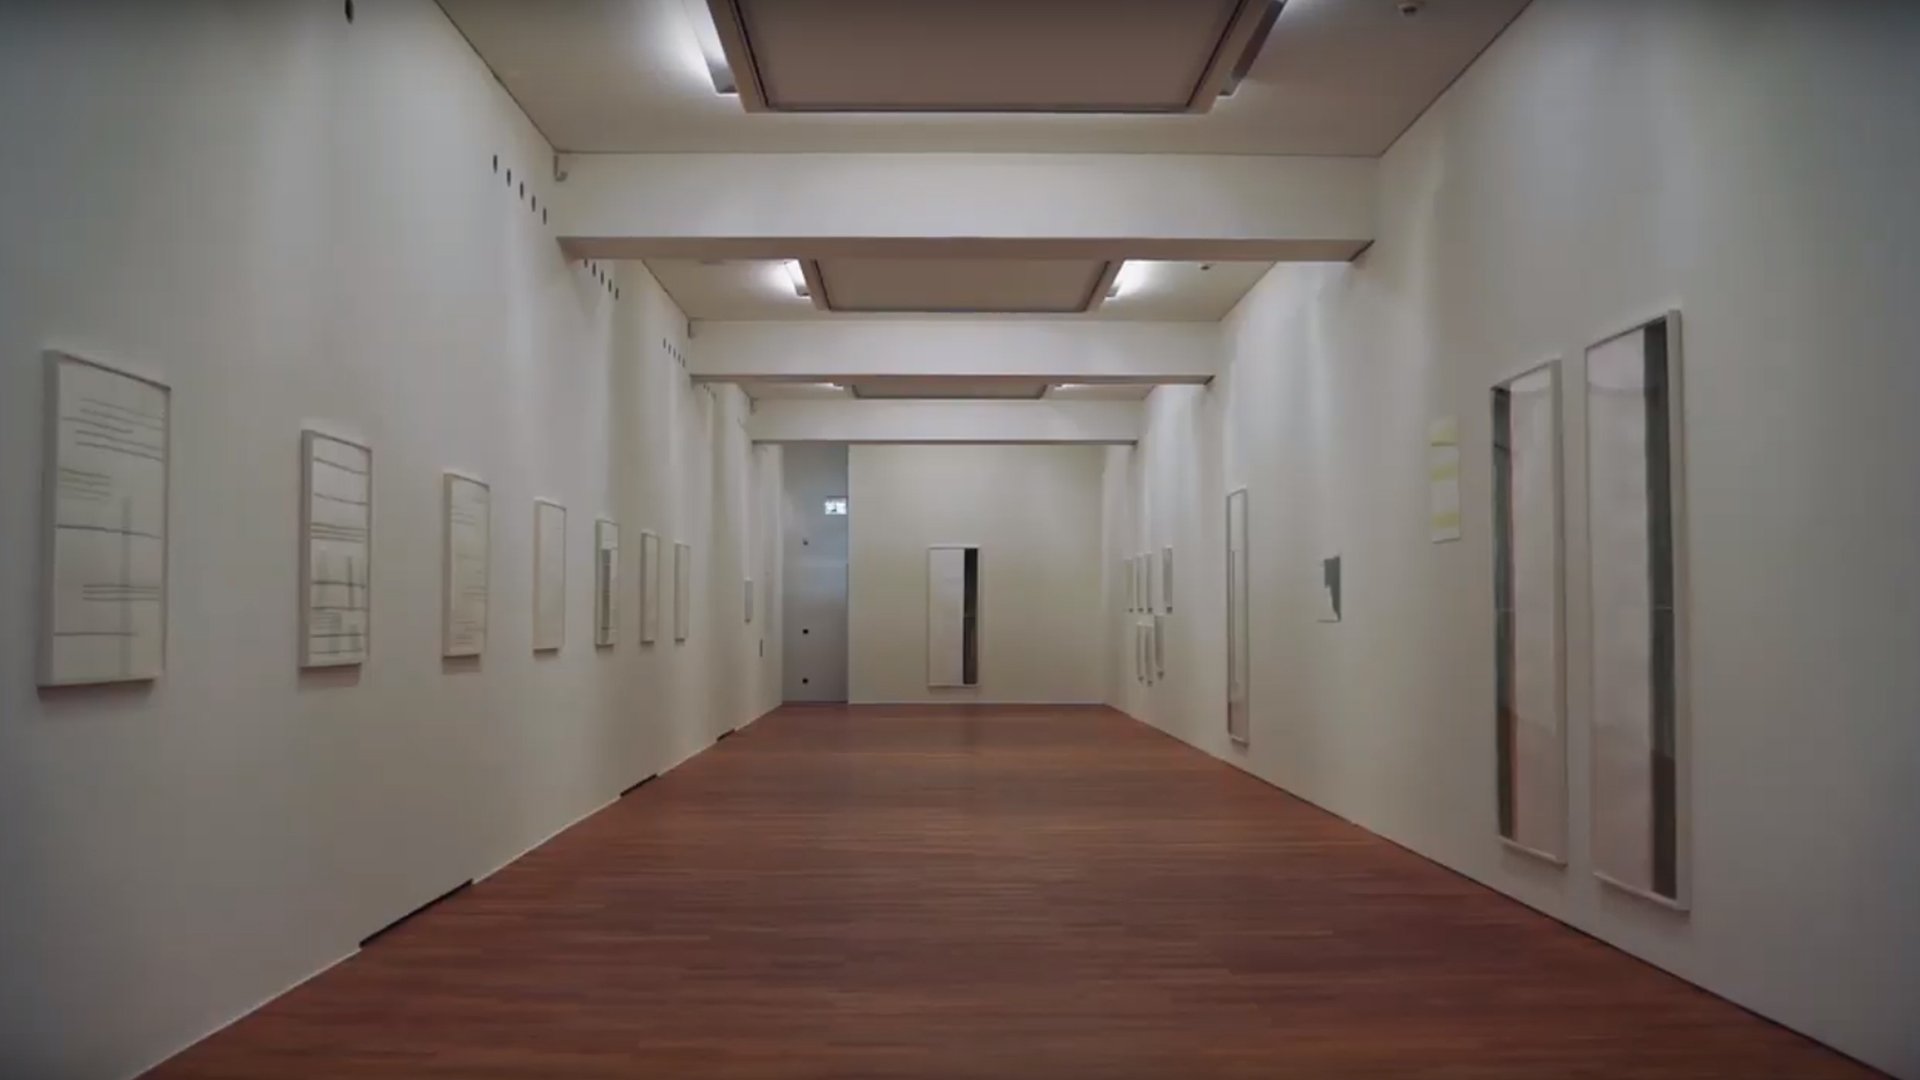 Film still from the exhibition teaser for "Silvia Bächli - shift! It shows a long exhibition room with works of art on the walls.